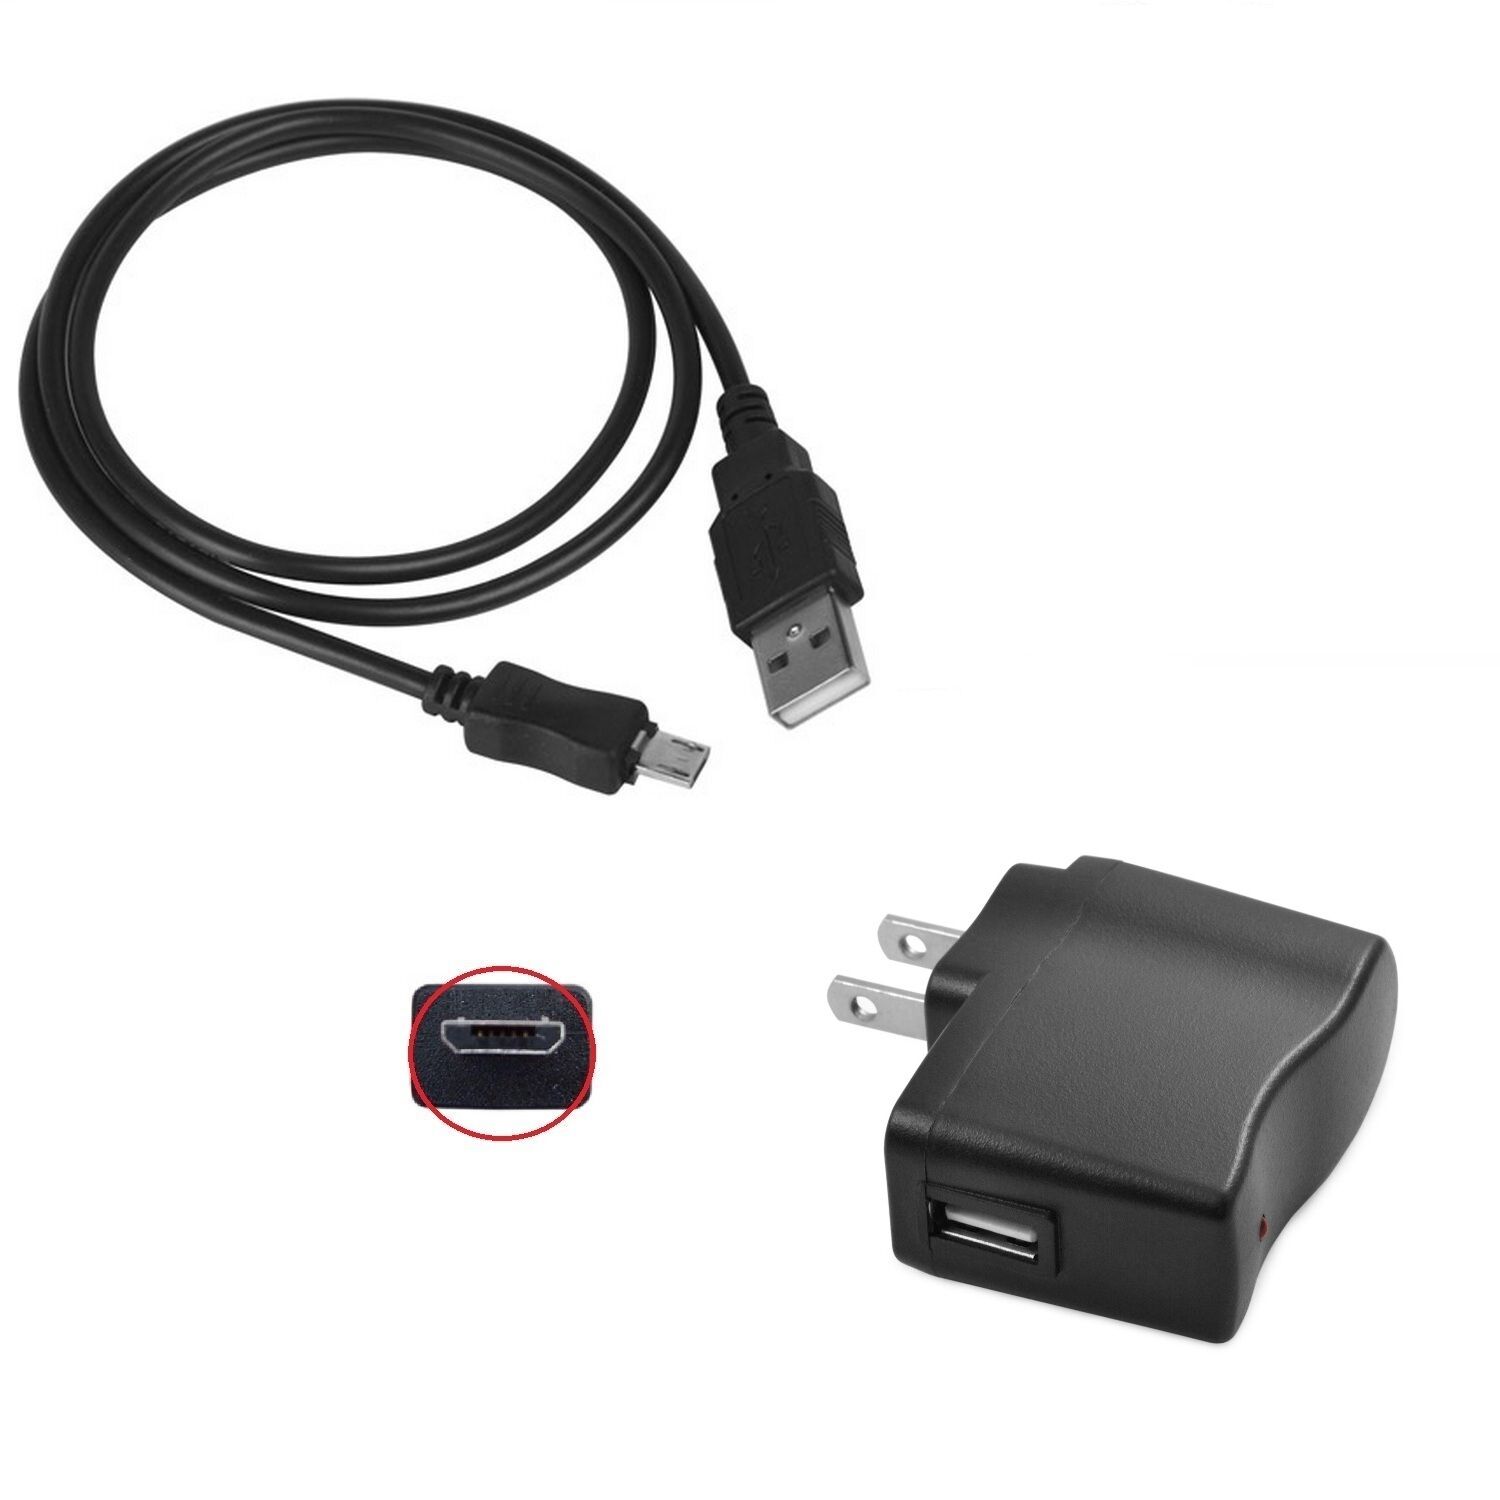 1A AC/DC Wall Power Charger Adapter Cord for ASUS Google Nexus 7 Tablet 1A AC/DC Wall Power Charger Adapter Cord for AS - Click Image to Close